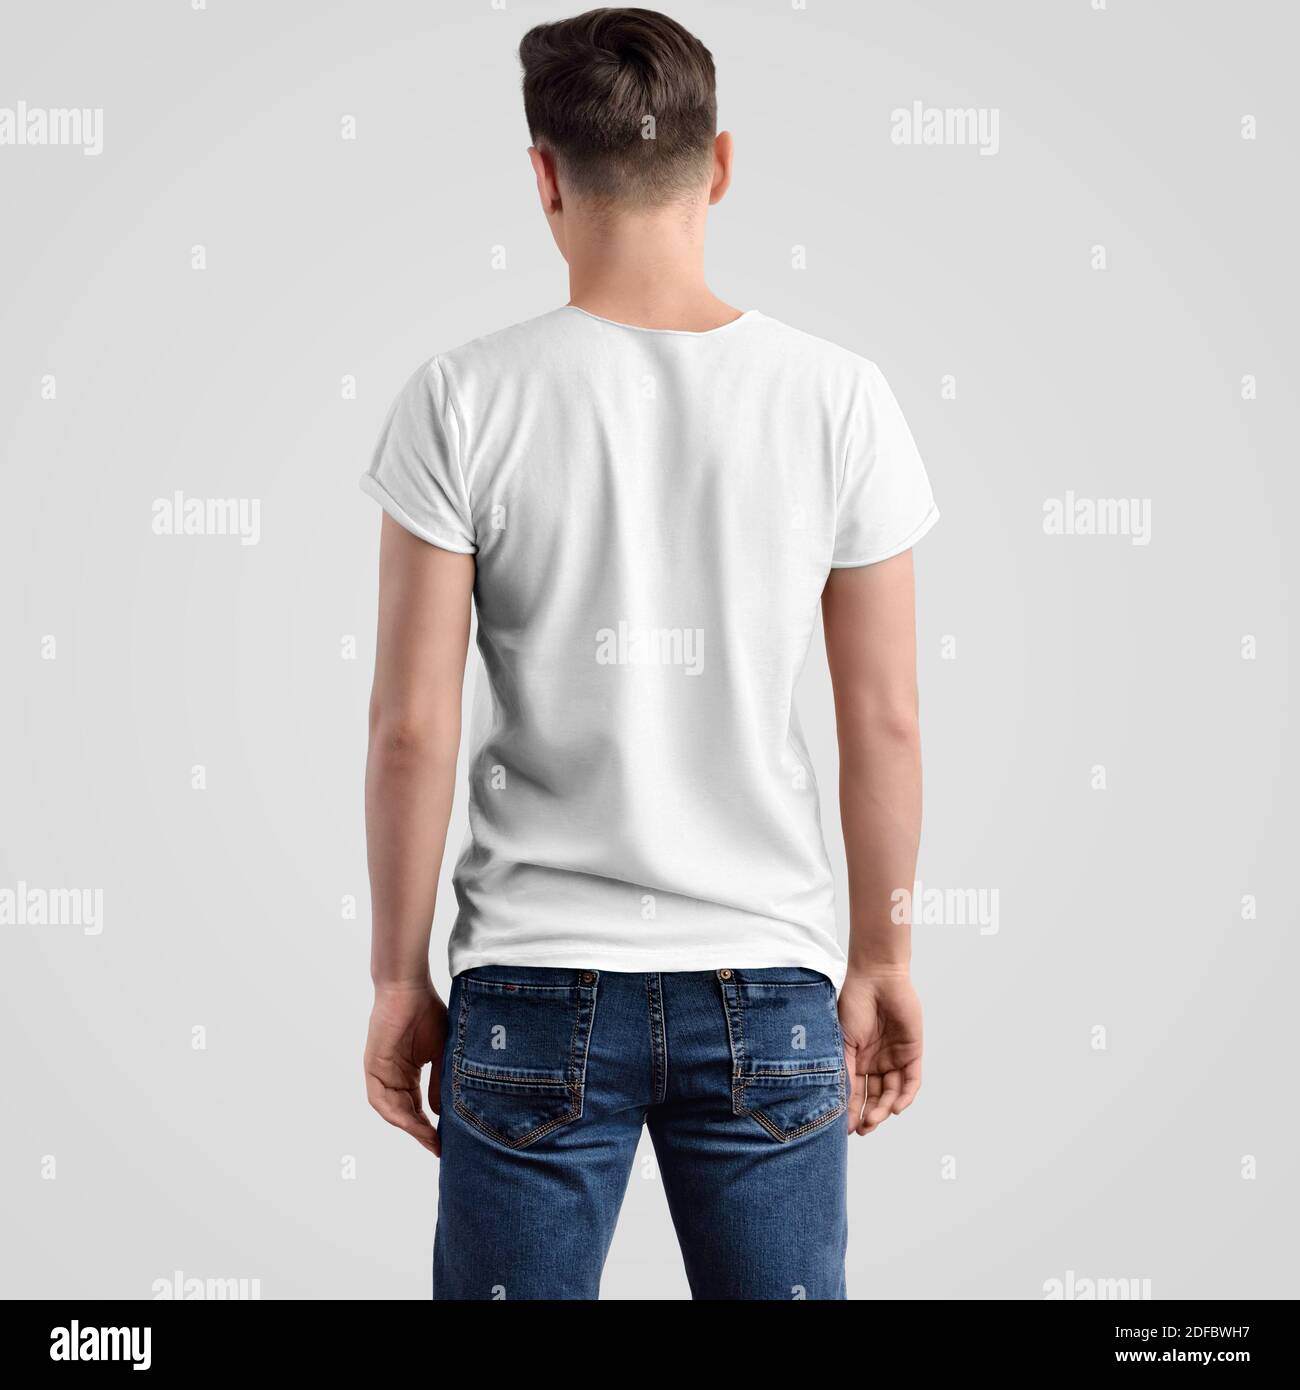 Mockup male t-shirt on a young guy in blue jeans, rear view. Clothing template on white background for design presentation. Stock Photo